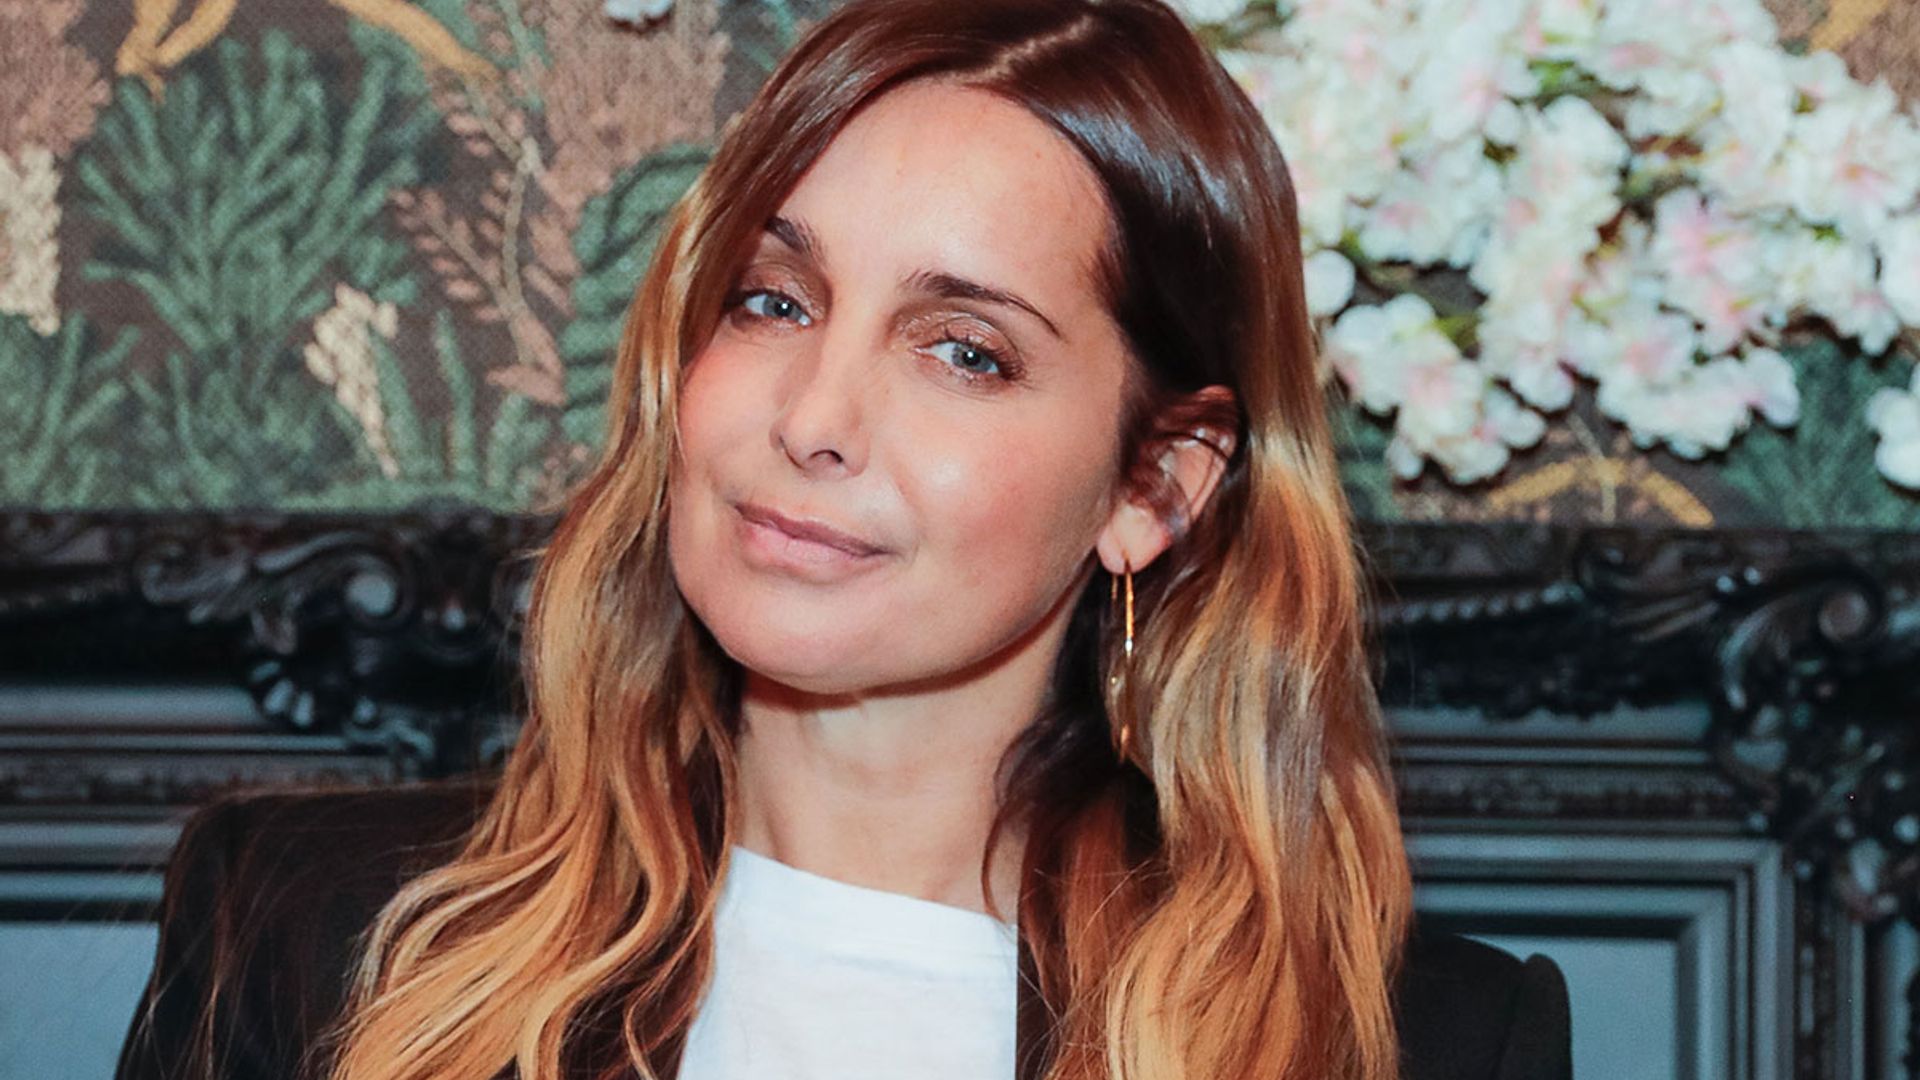 Louise Redknapp poses in ultra flattering jeans and knit – and fans love it